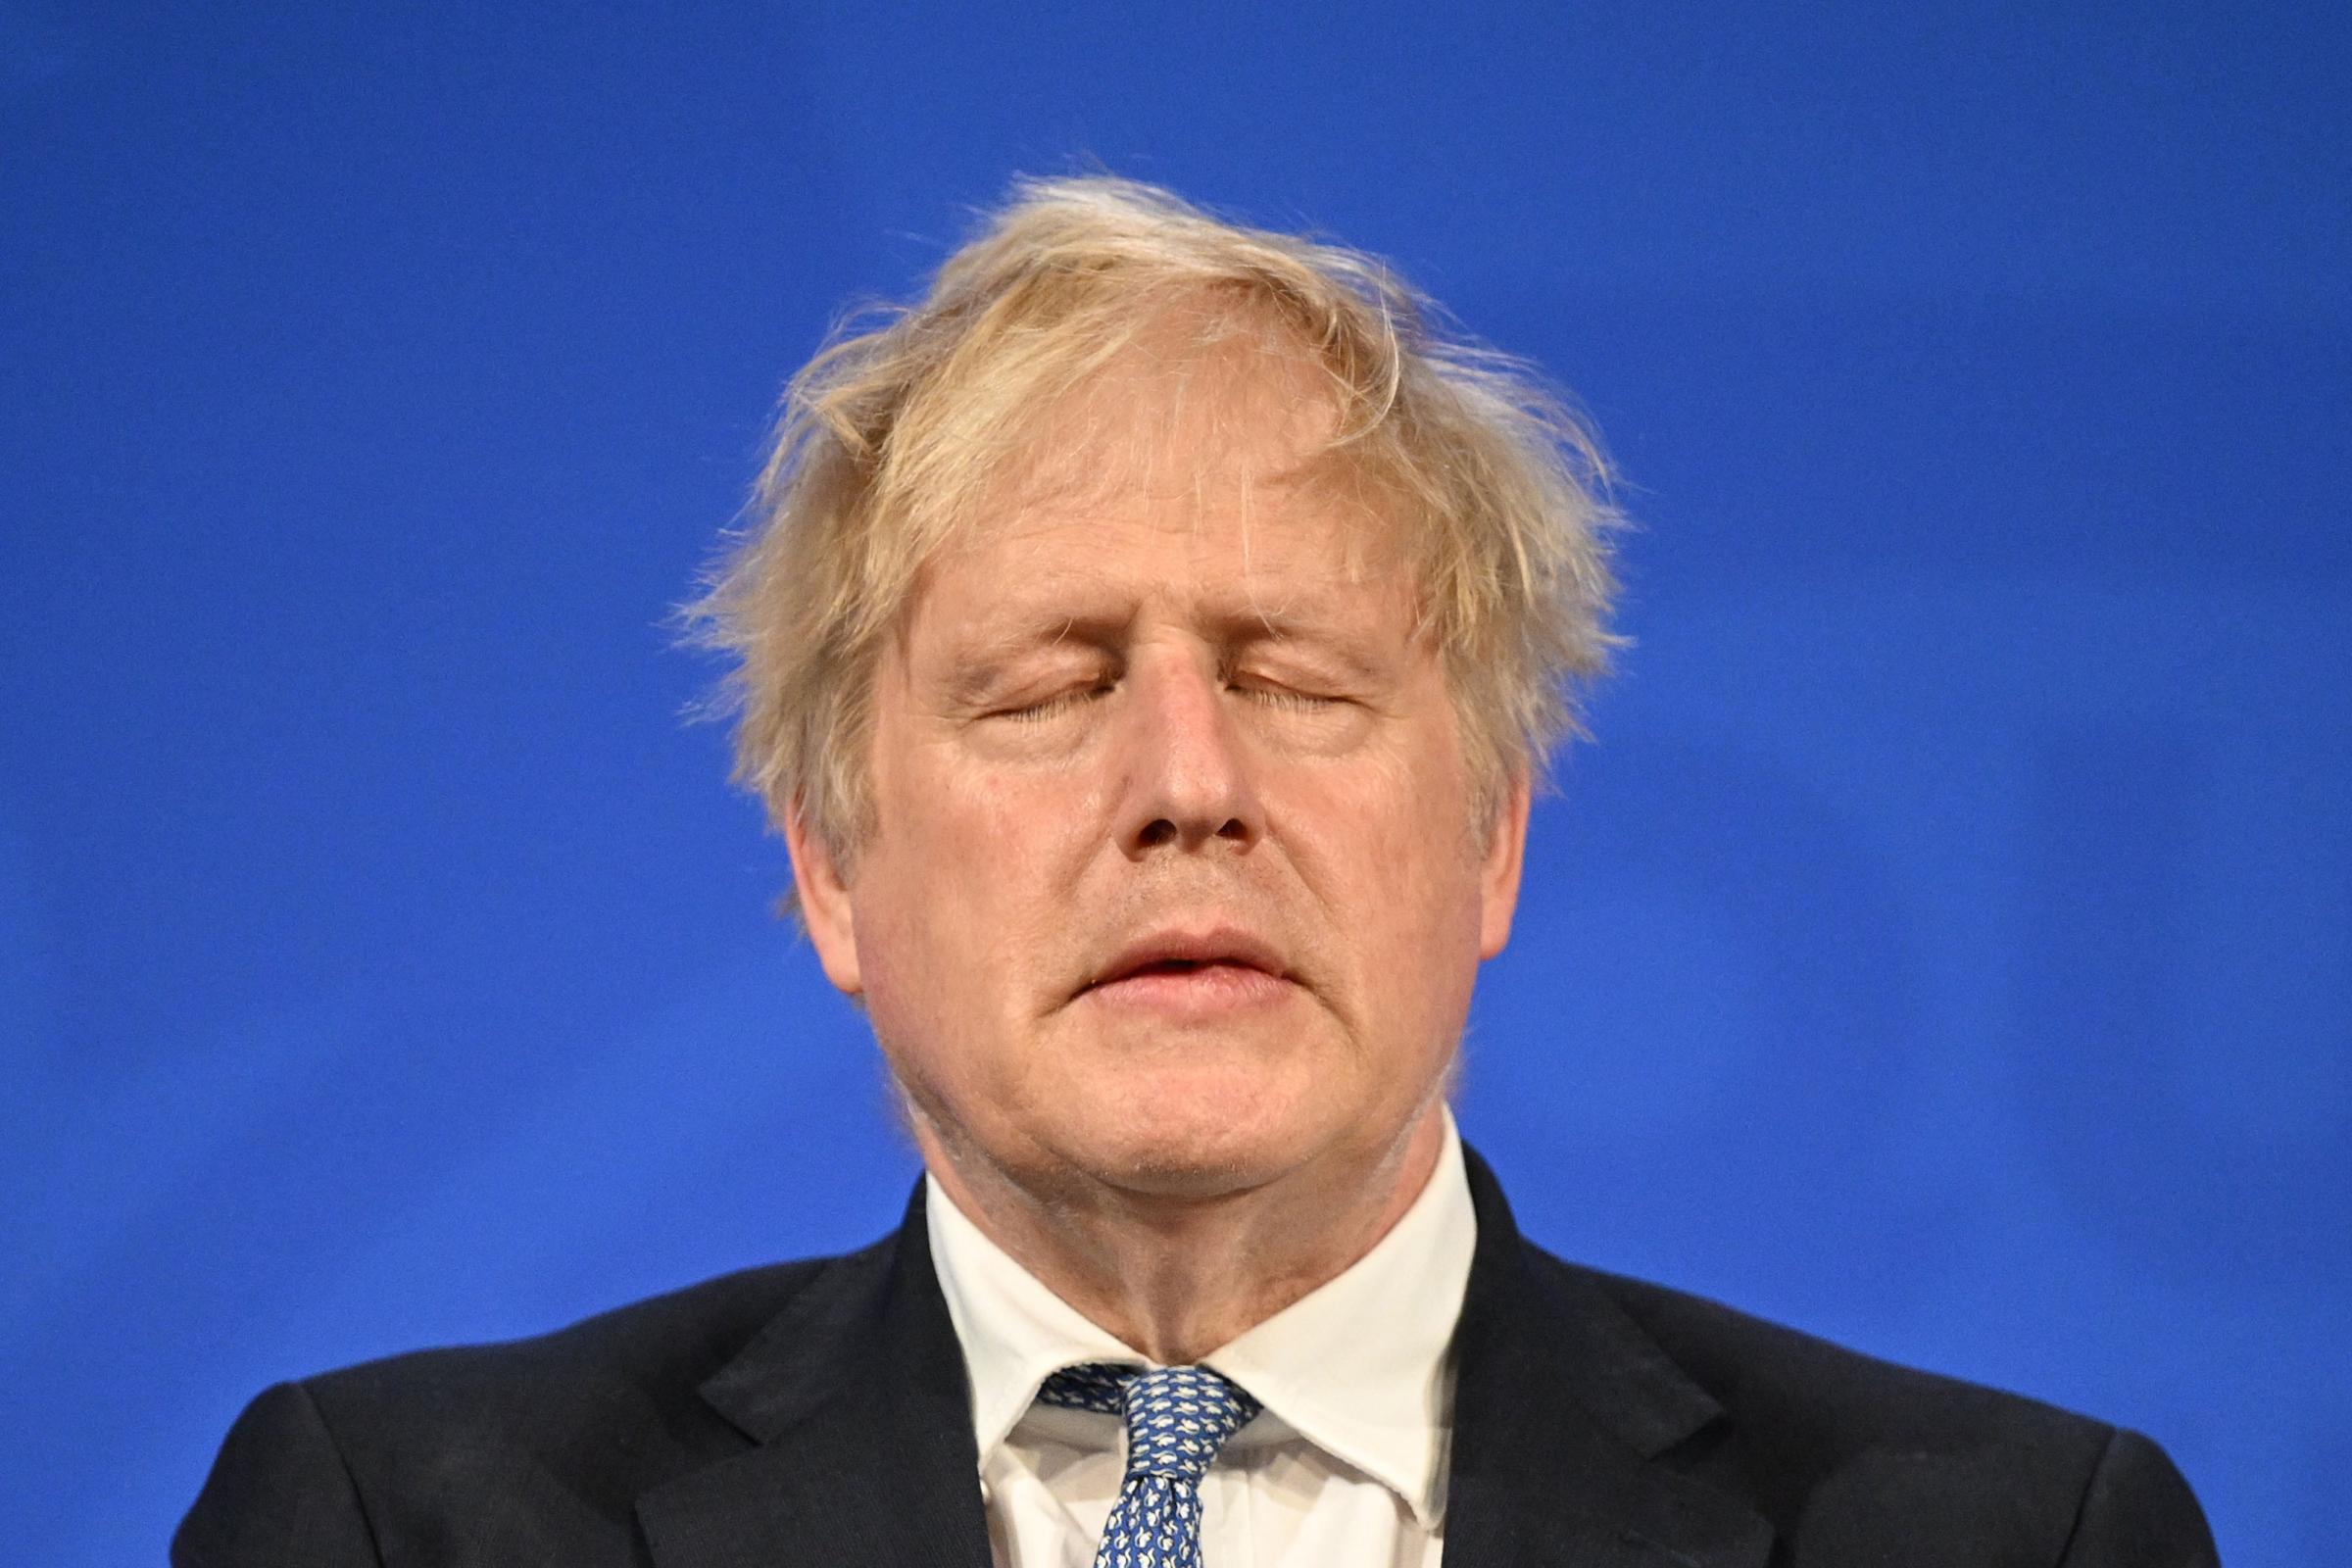 LIVE updates: Boris Johnson 'agrees to resign but wants to stay on as PM until autumn'